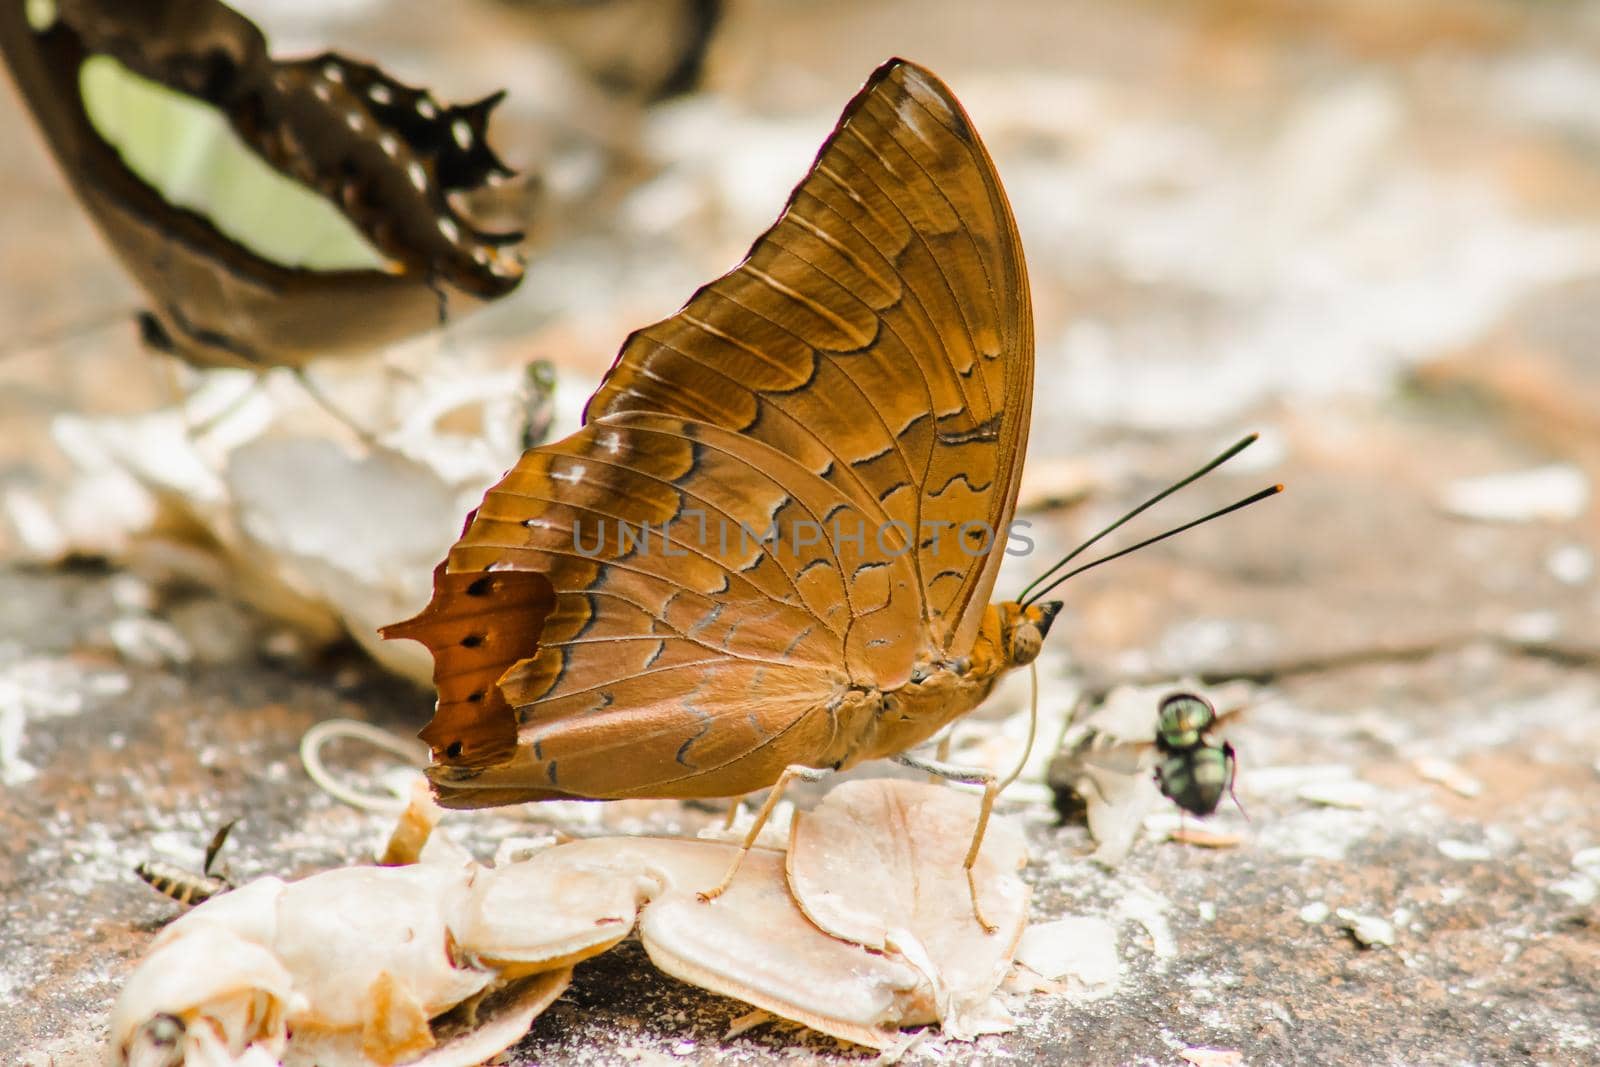 (Common Cruiser) Family name: Family of tassel-leg butterflies (Nymphalidae) on the rocky ground Description: The wings on the wing are brown-orange. It has a pair of black jagged stripes along the edge of the wing along the rear wing tip with a pointed tip sticking out.







